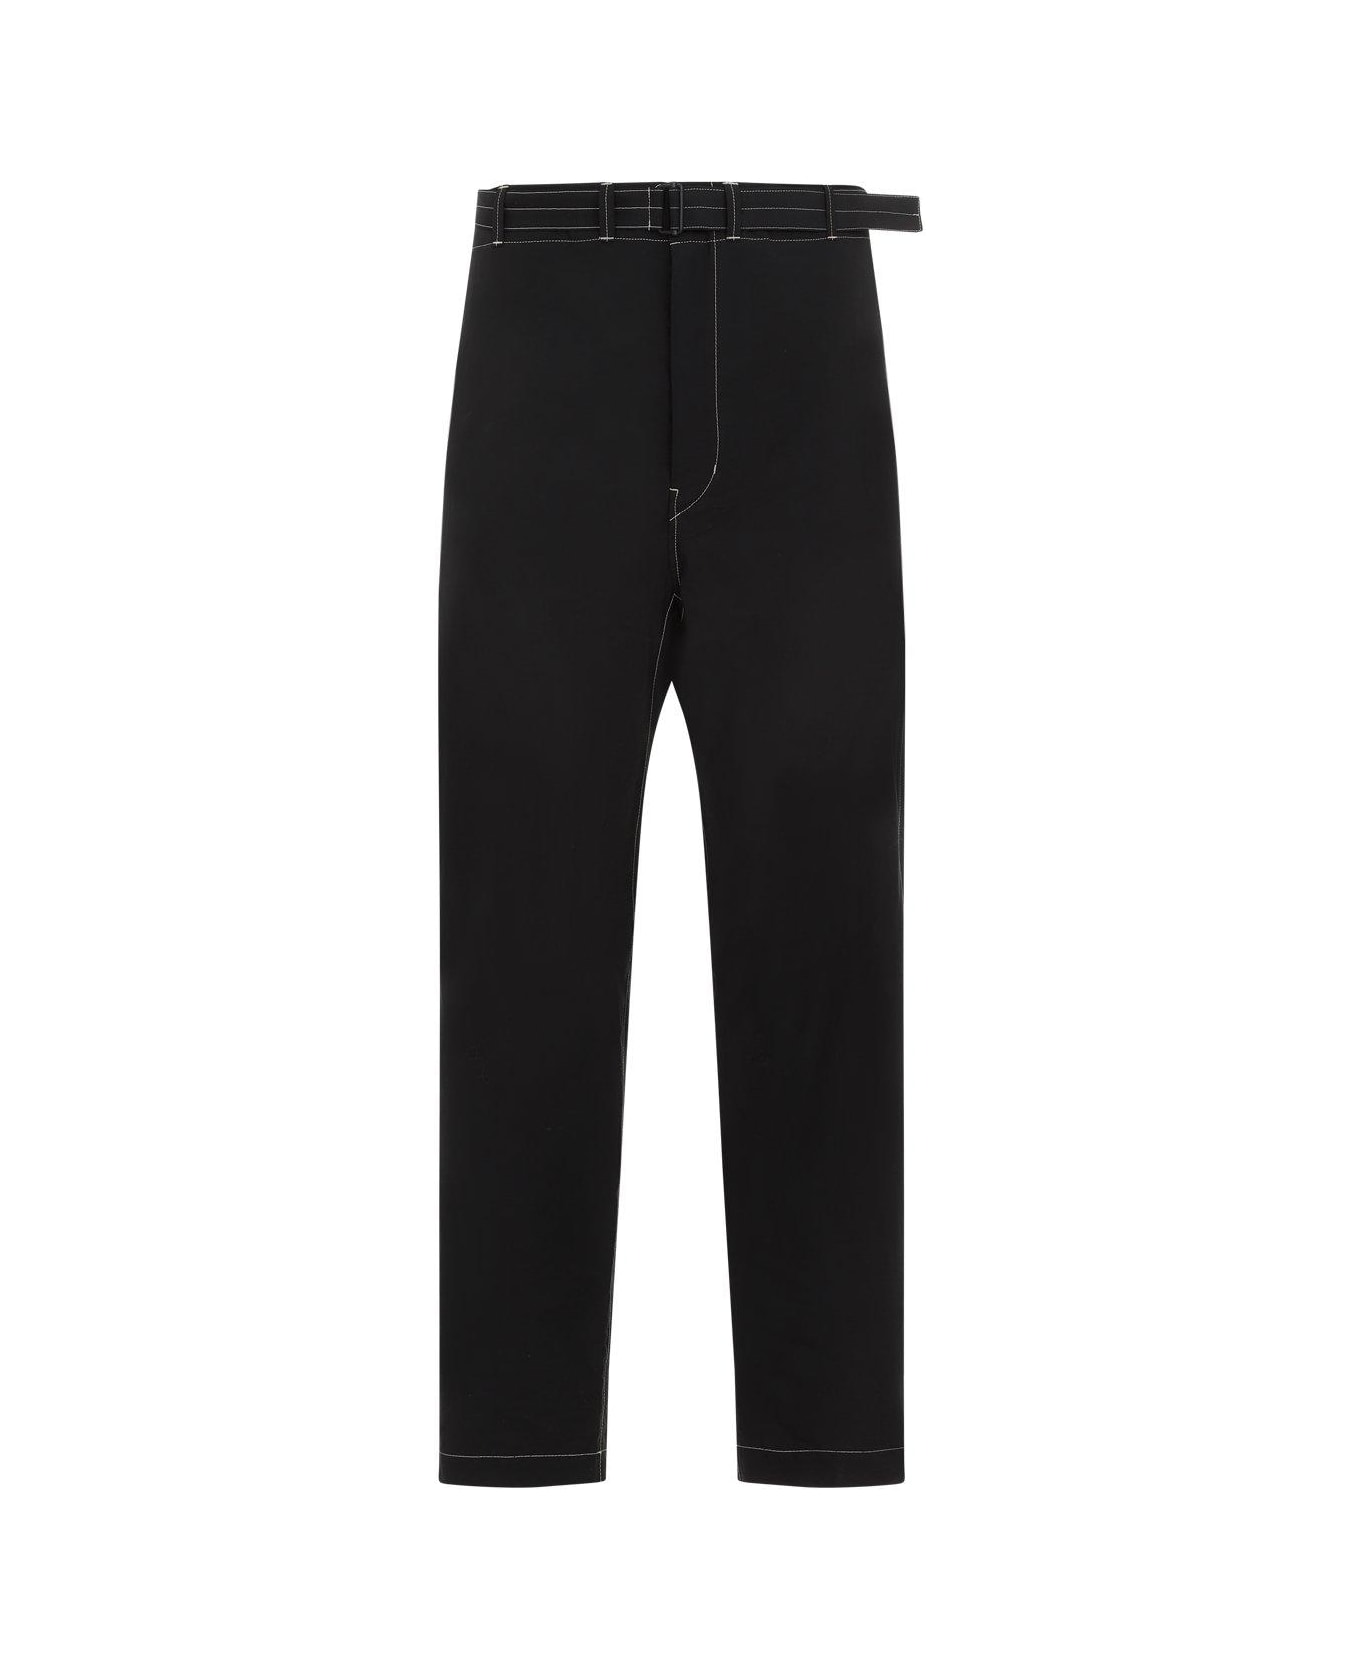 Lemaire Belted Cargo Pants - Black ボトムス